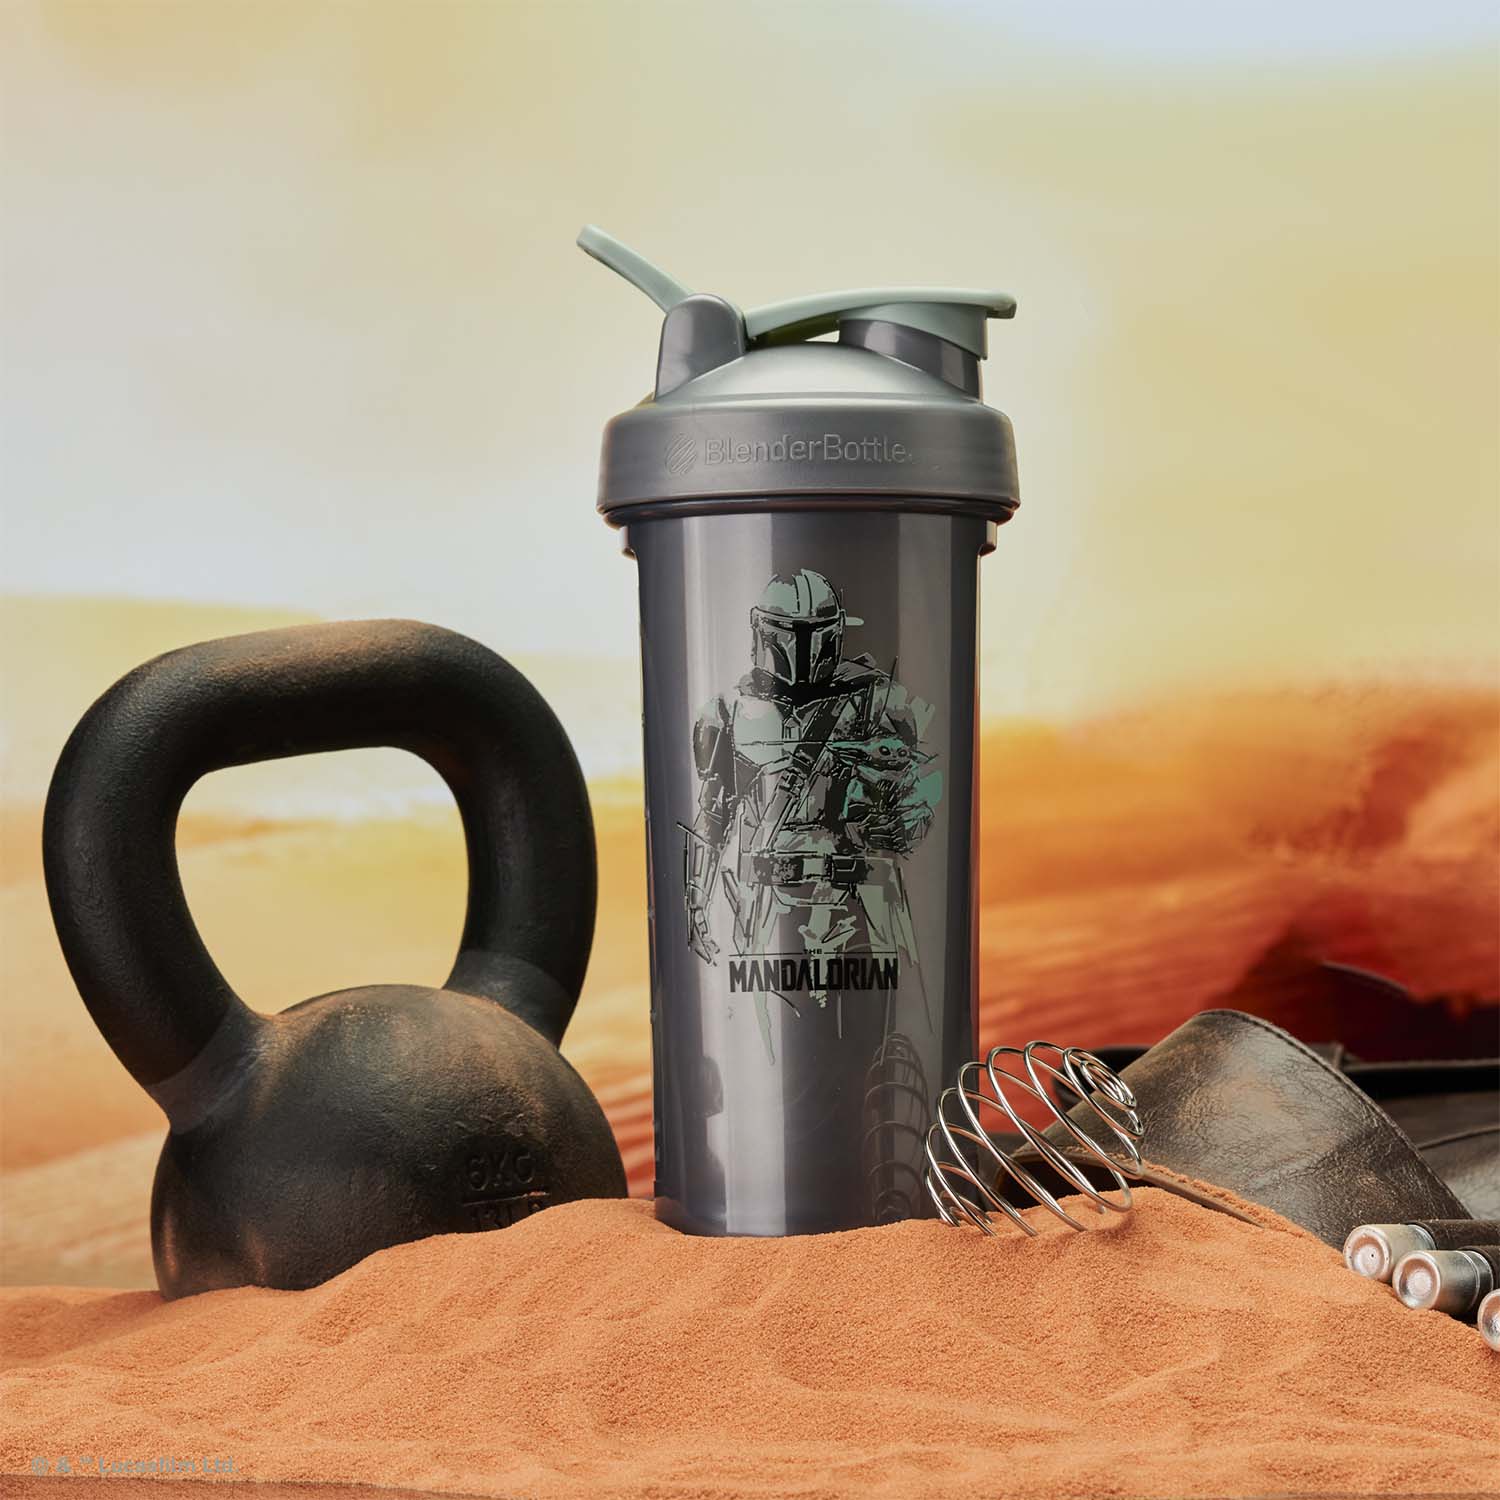 Mandalorian protein shaker cup in a desert setting with a kettlebell and wire whisk BlenderBall